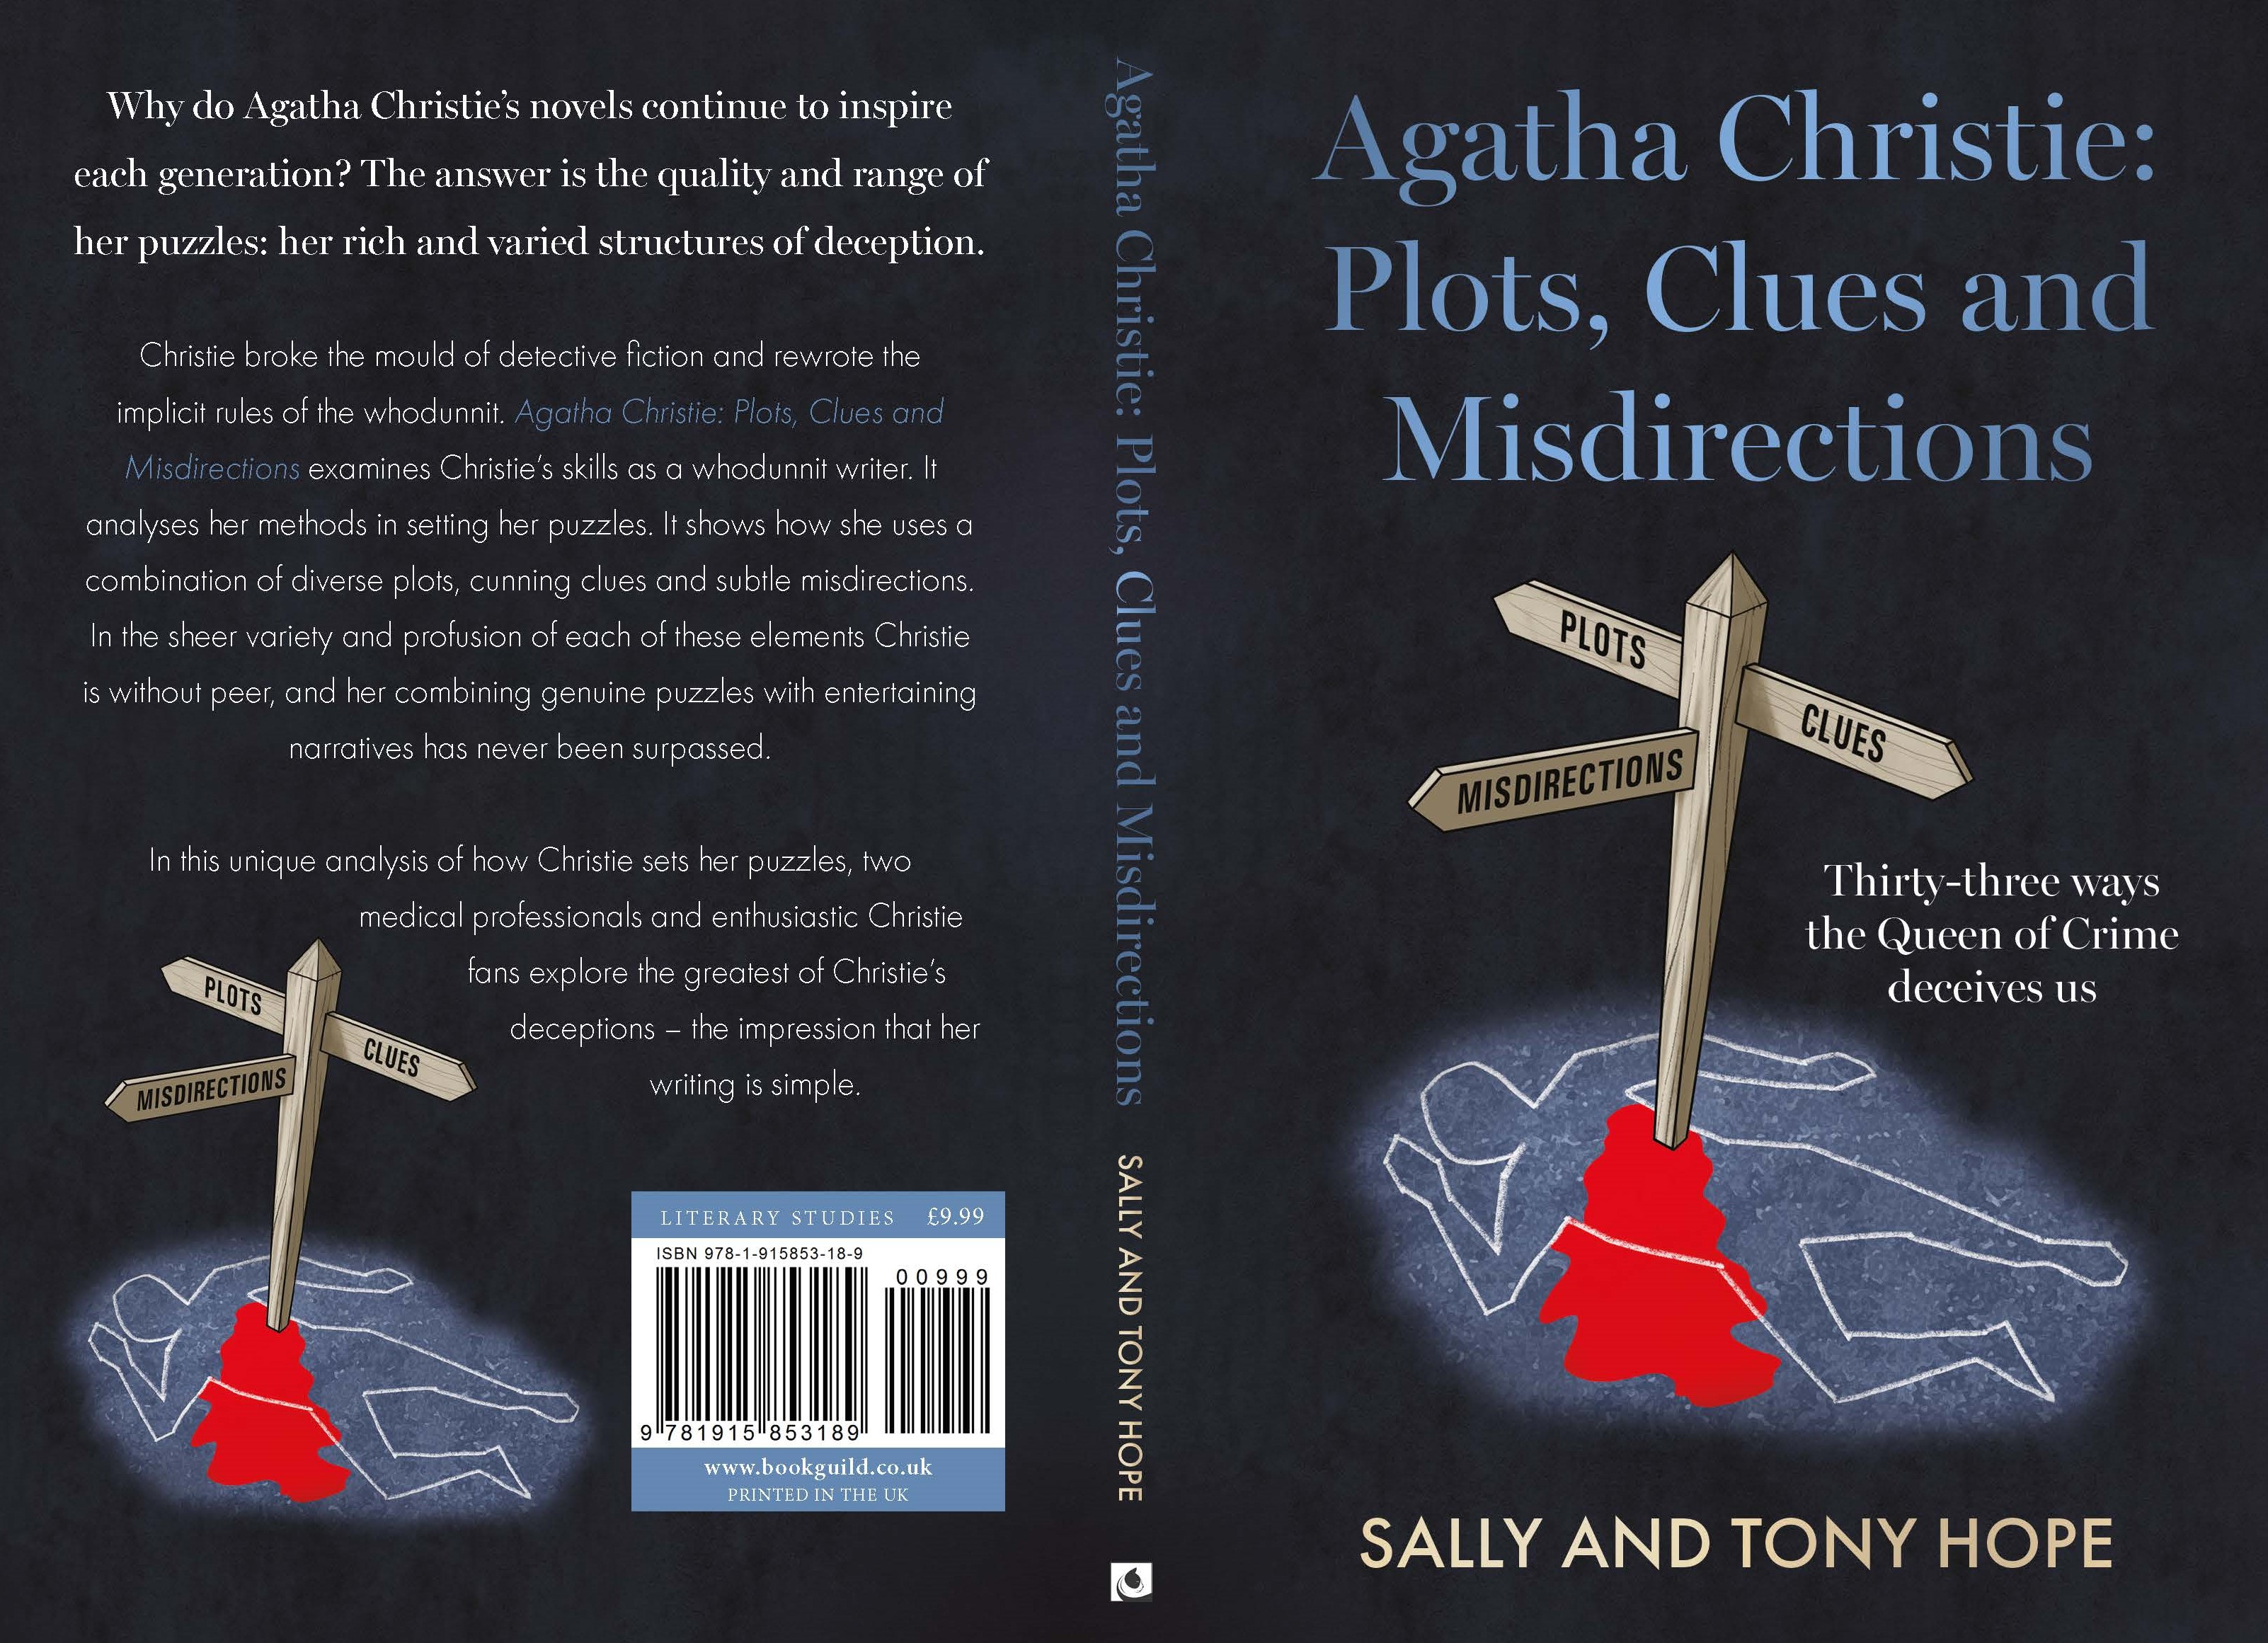 The front and back covers of Agatha Christie: Plots, Clues and Misdirections by Sally and Tony Hope